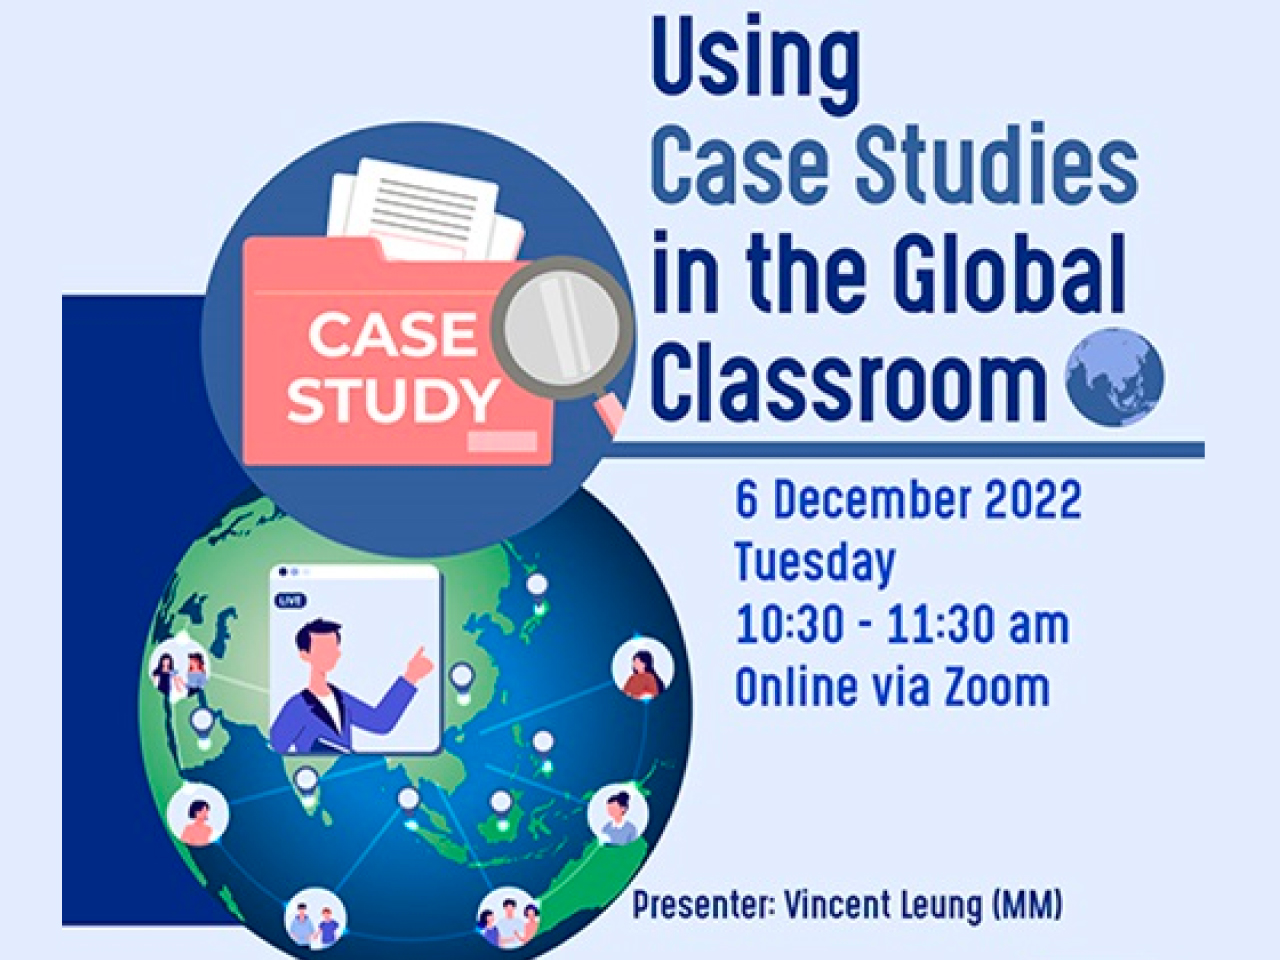 Using Case Studies in the Global Classroom